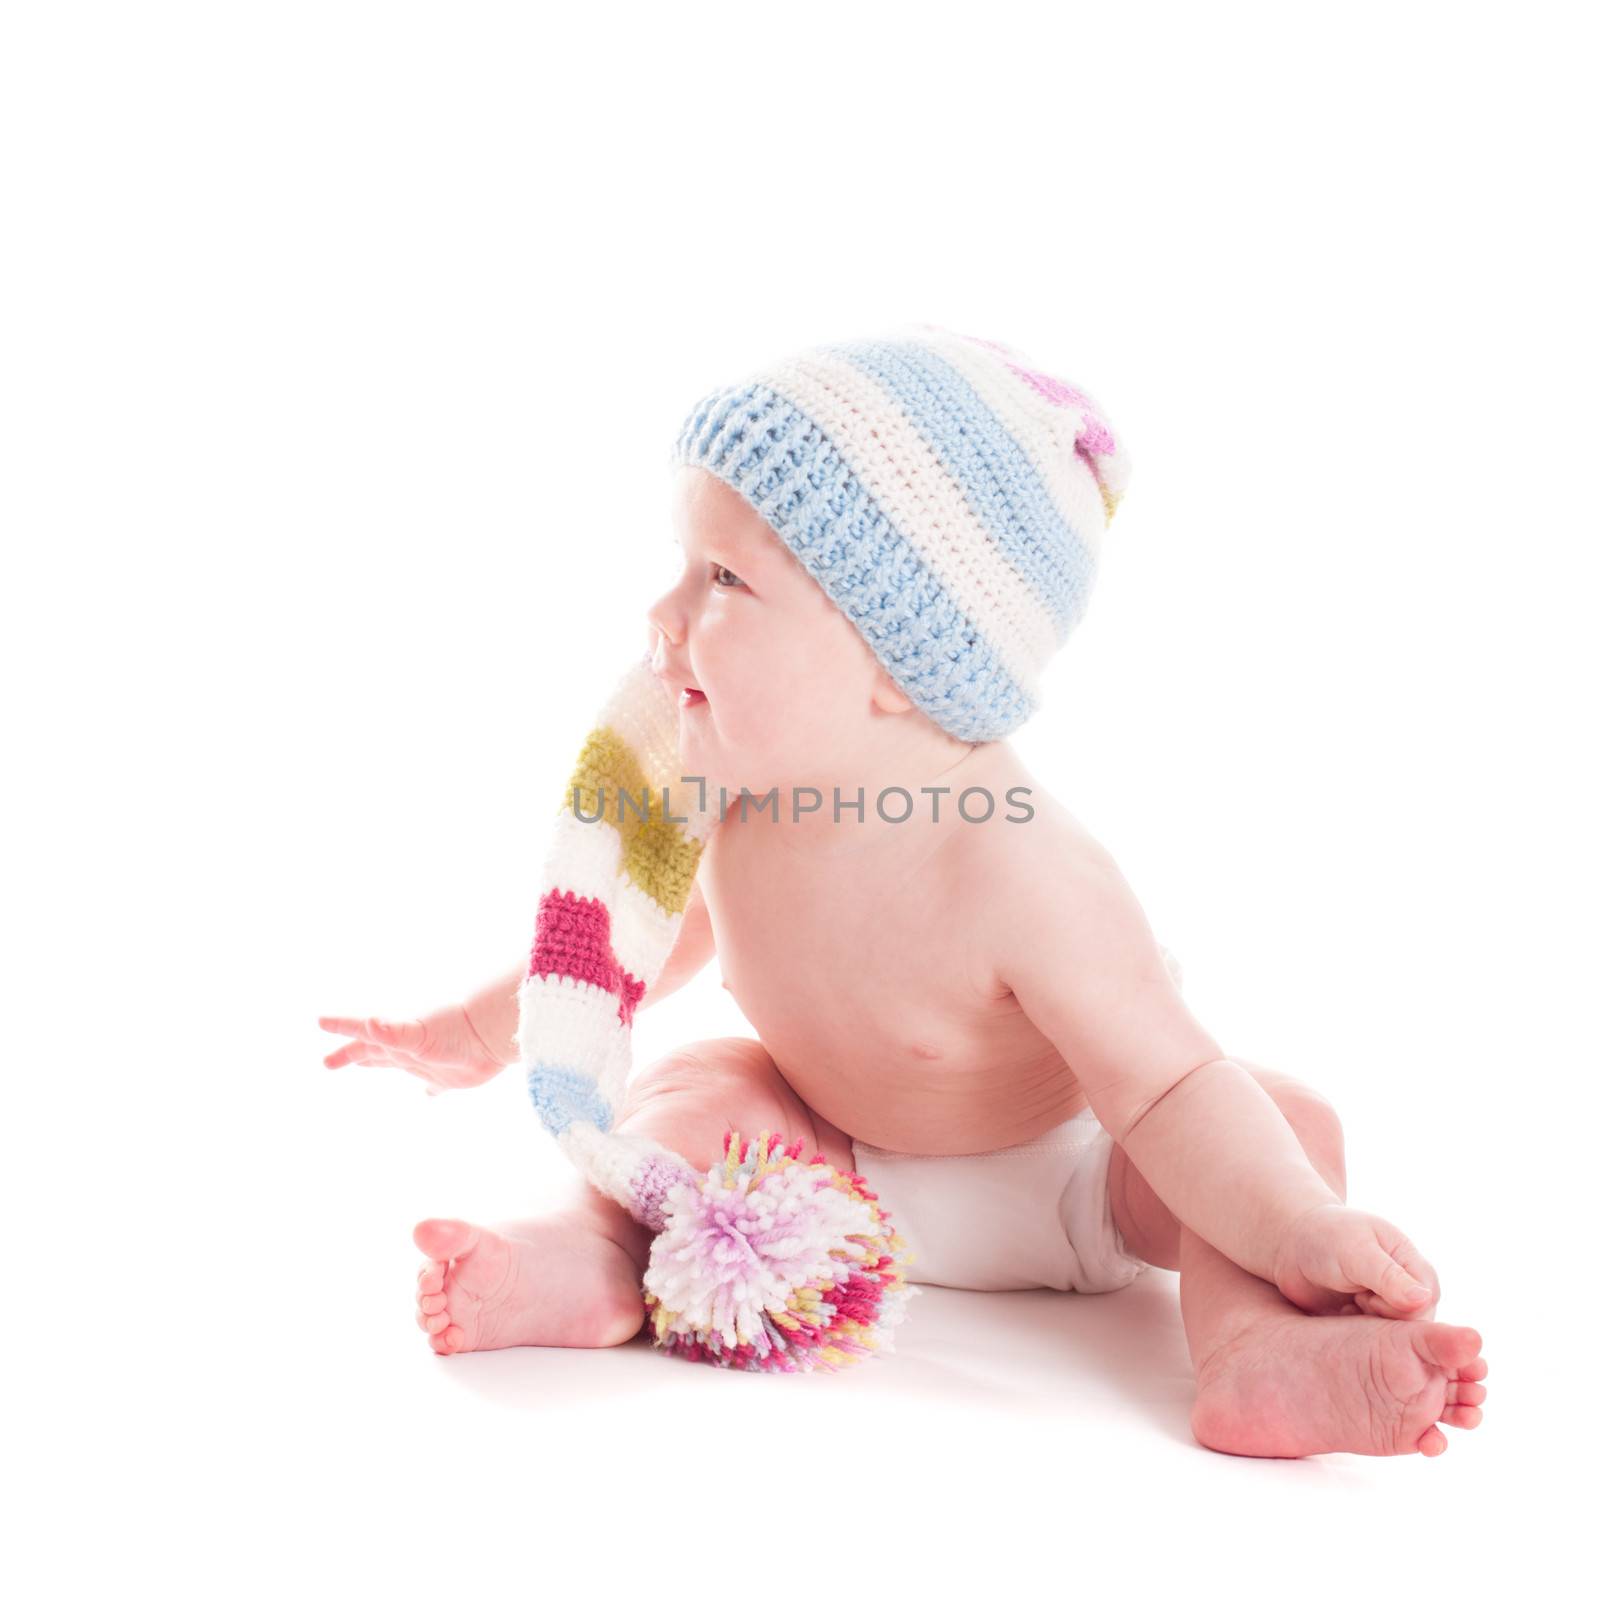 Adorable 6 month baby in crochet hat looks away, on white